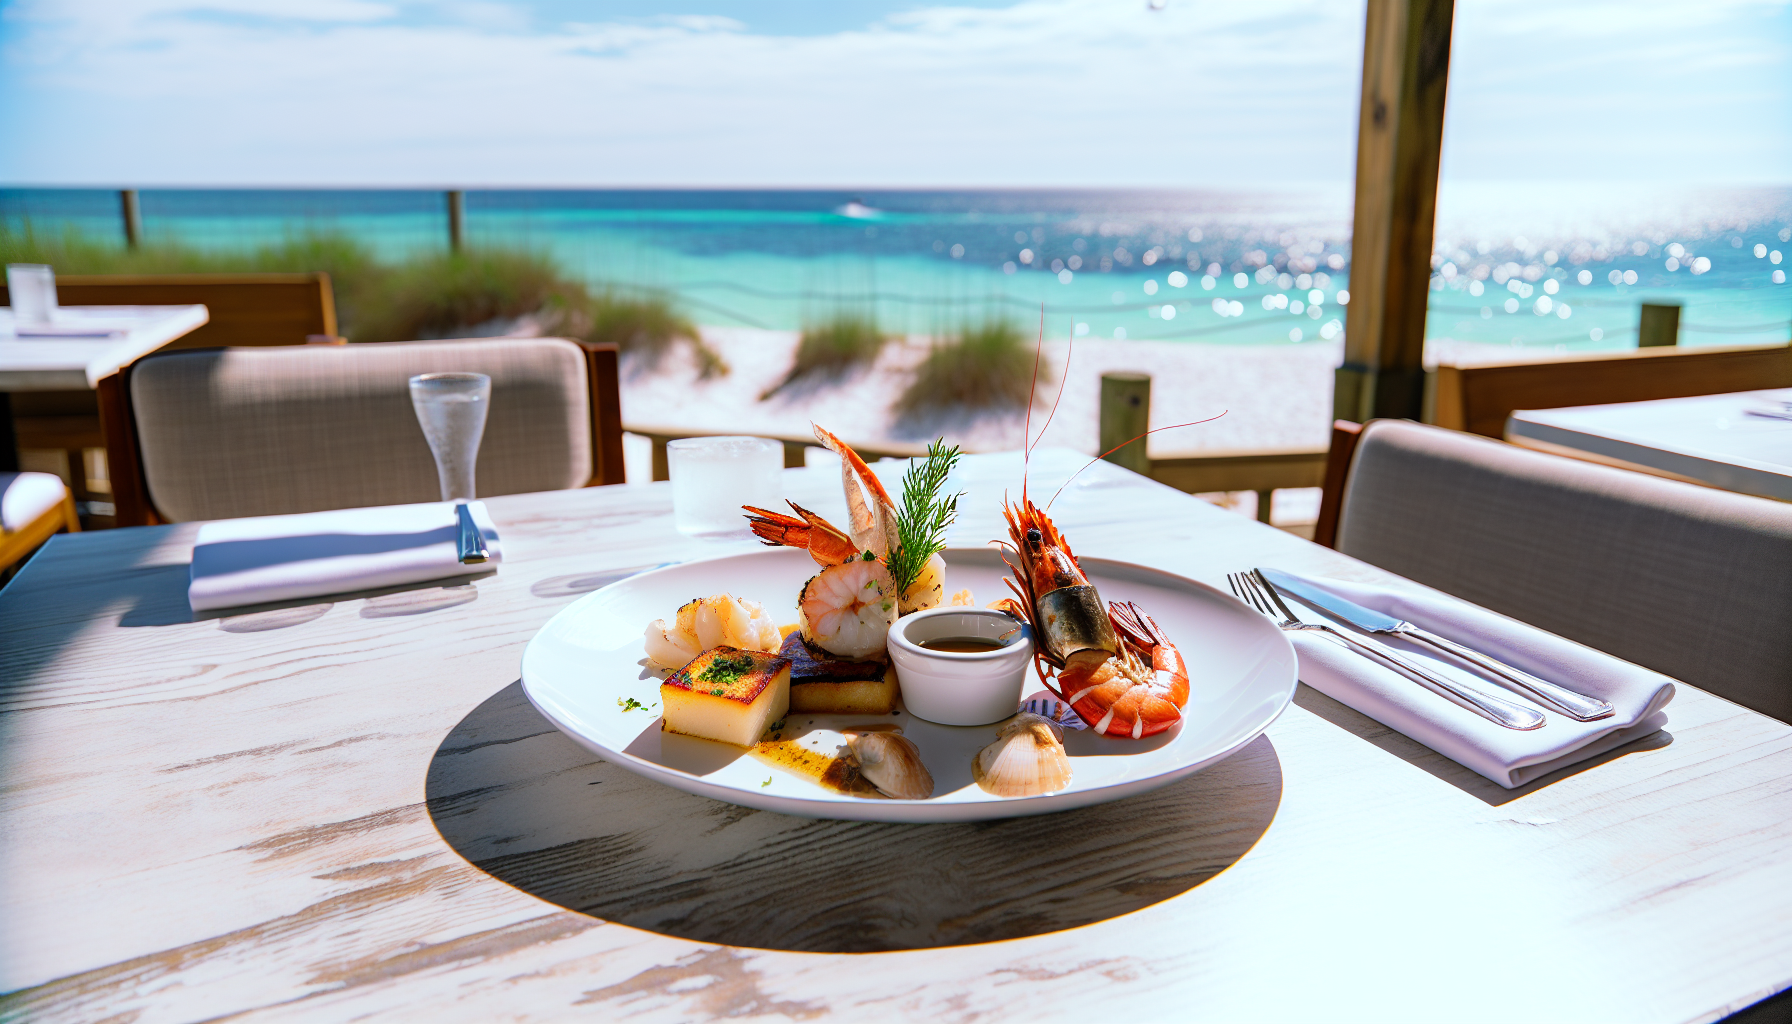                            A seafood dish served with a view of the crystal-clear waters in Destin